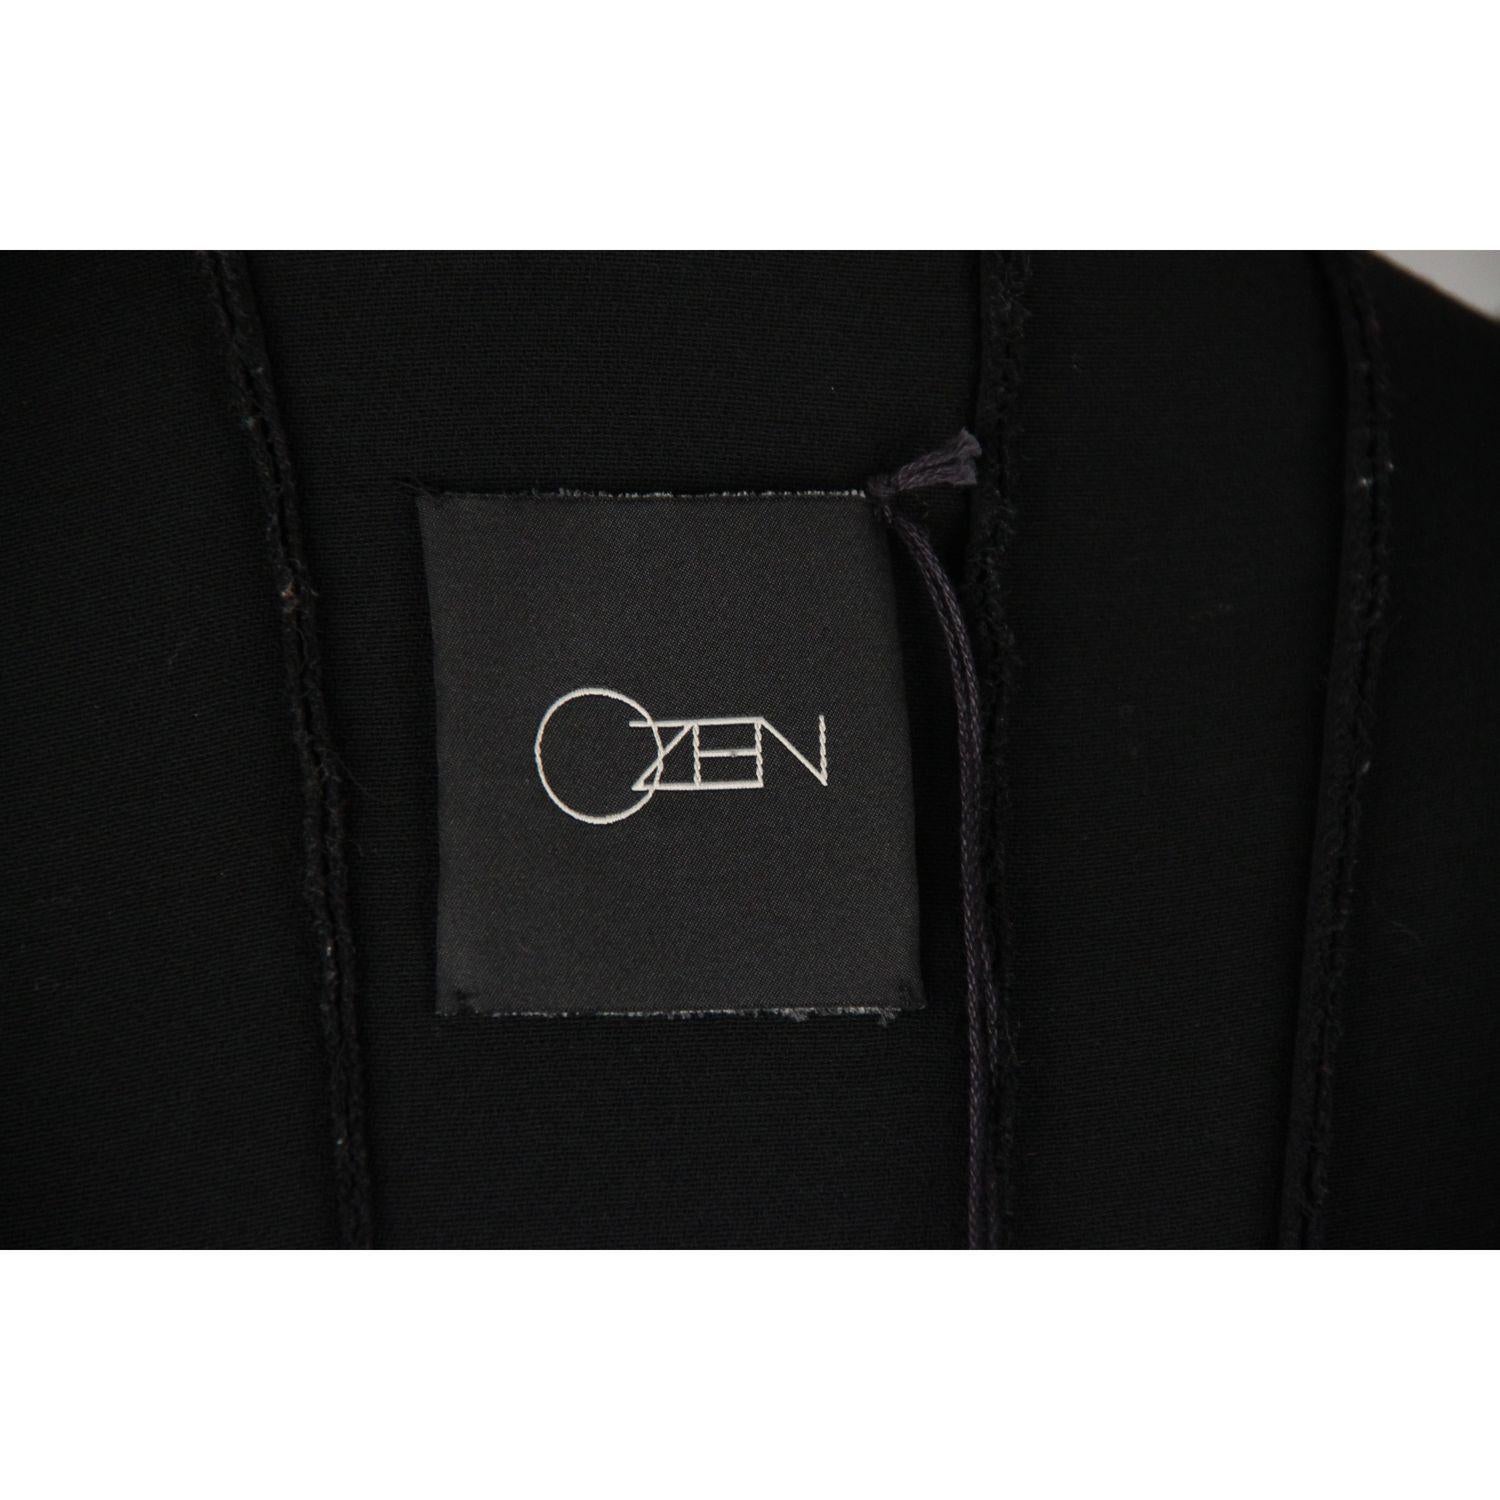 - Beautiful cardigan by OZEN, made in Italy - Composition: 100% Wool - Open front design - Size: 412IT - Internal Ref: - 49672513-MB - Shipping with DHL Express (Worlwide delivery: 3 to 5 days) - OZEN Black Wool OPEN FRONT CARDIGAN Size 42 - by: -